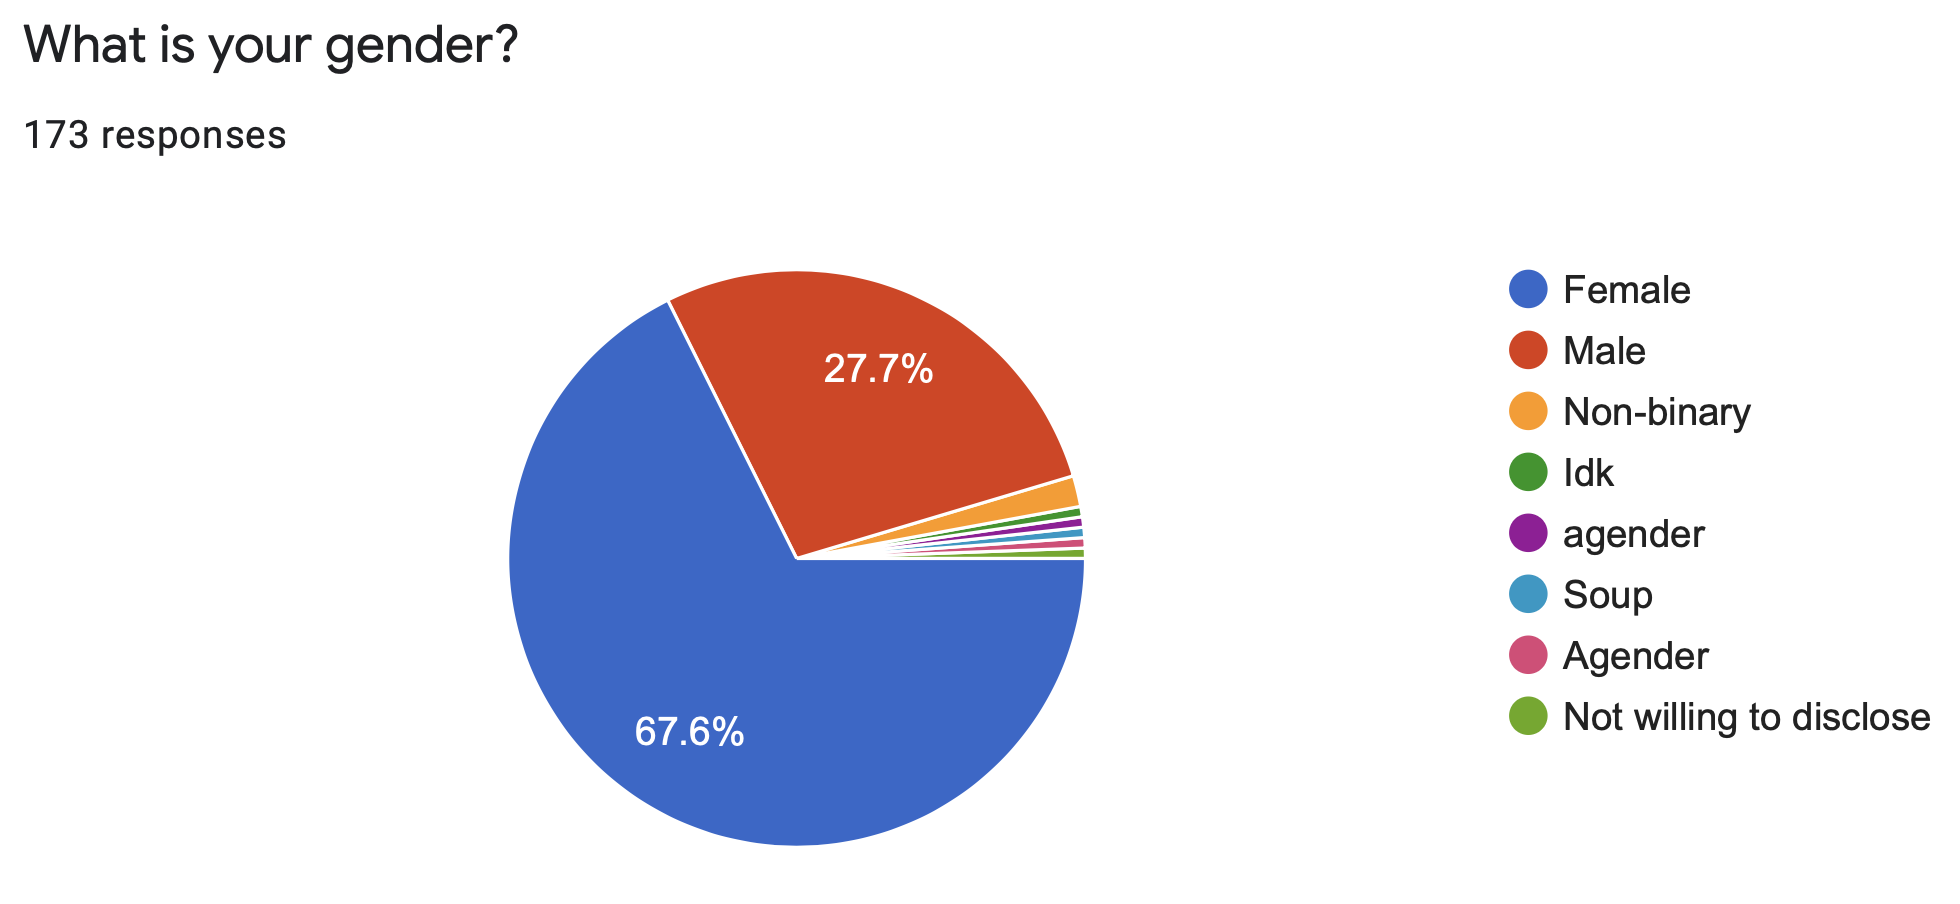 Pie chart showing that most respondents
identified as women.